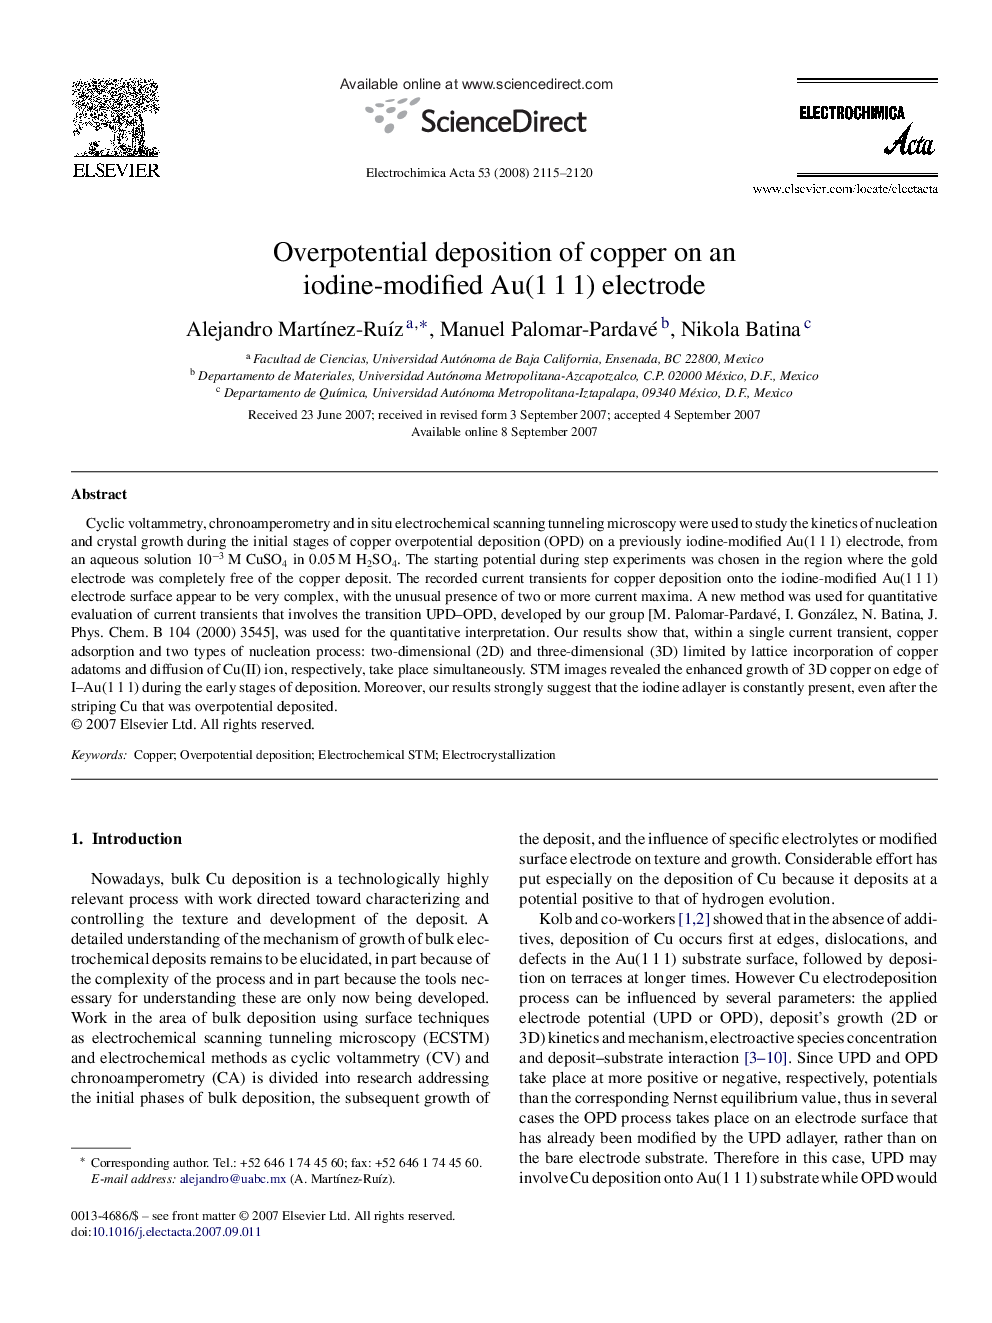 Overpotential deposition of copper on an iodine-modified Au(1 1 1) electrode